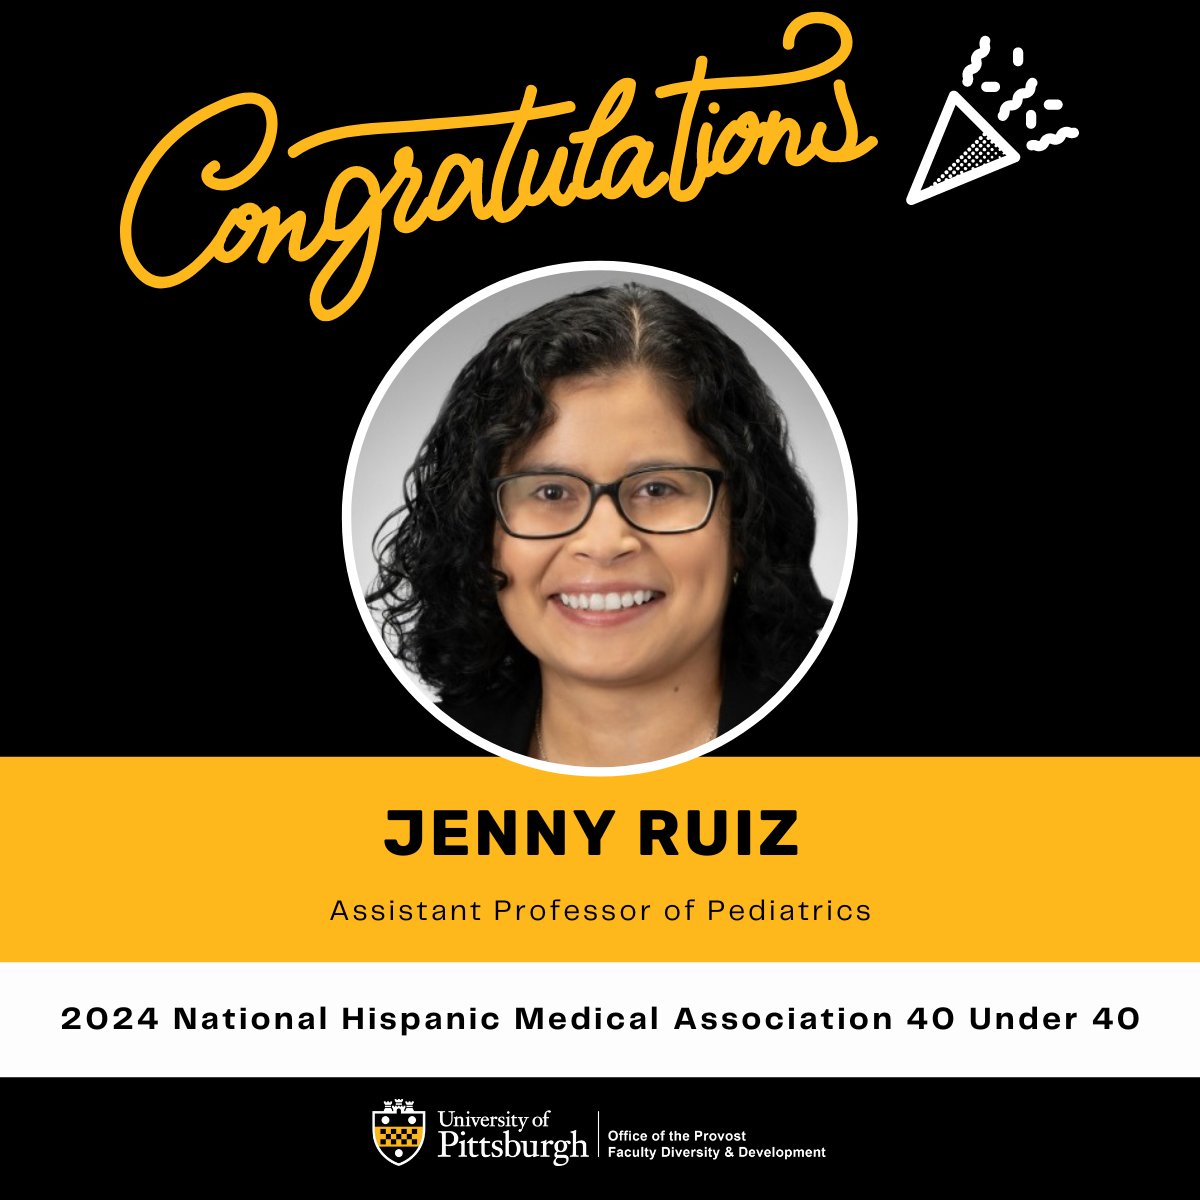 Congratulations to @JennyRuizMD, assistant professor of pediatrics, who was named the to the 2024 National Hispanic Medical Association 40 Under 40 list. #H2P